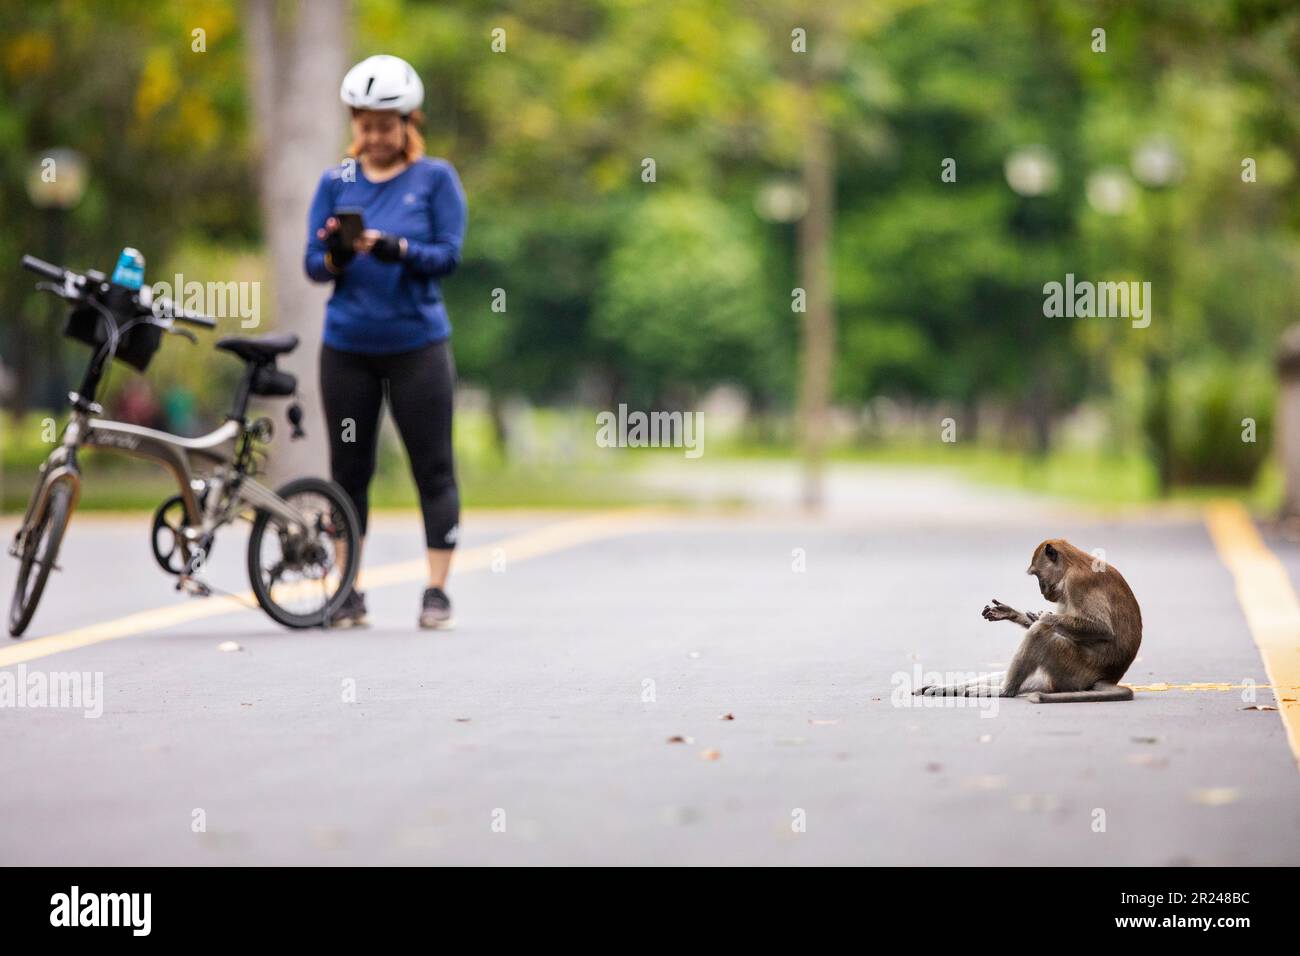 A Singaporean cyclist gets off her bike to take a smart phone photo of a macaque sitting on a bridge, Singapore Stock Photo